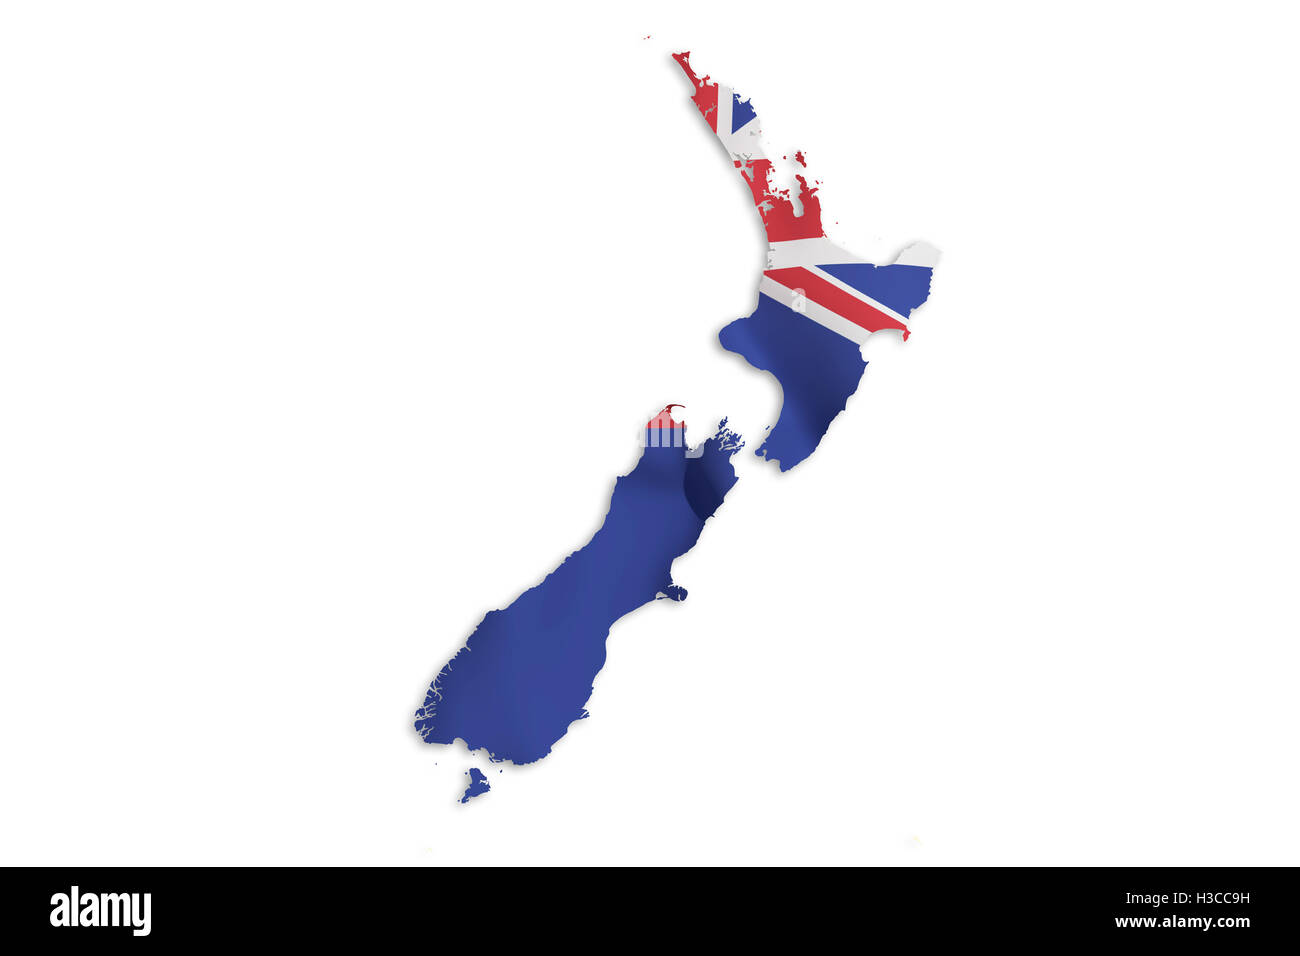 3d rendering of a New Zealand map and flag Stock Photo